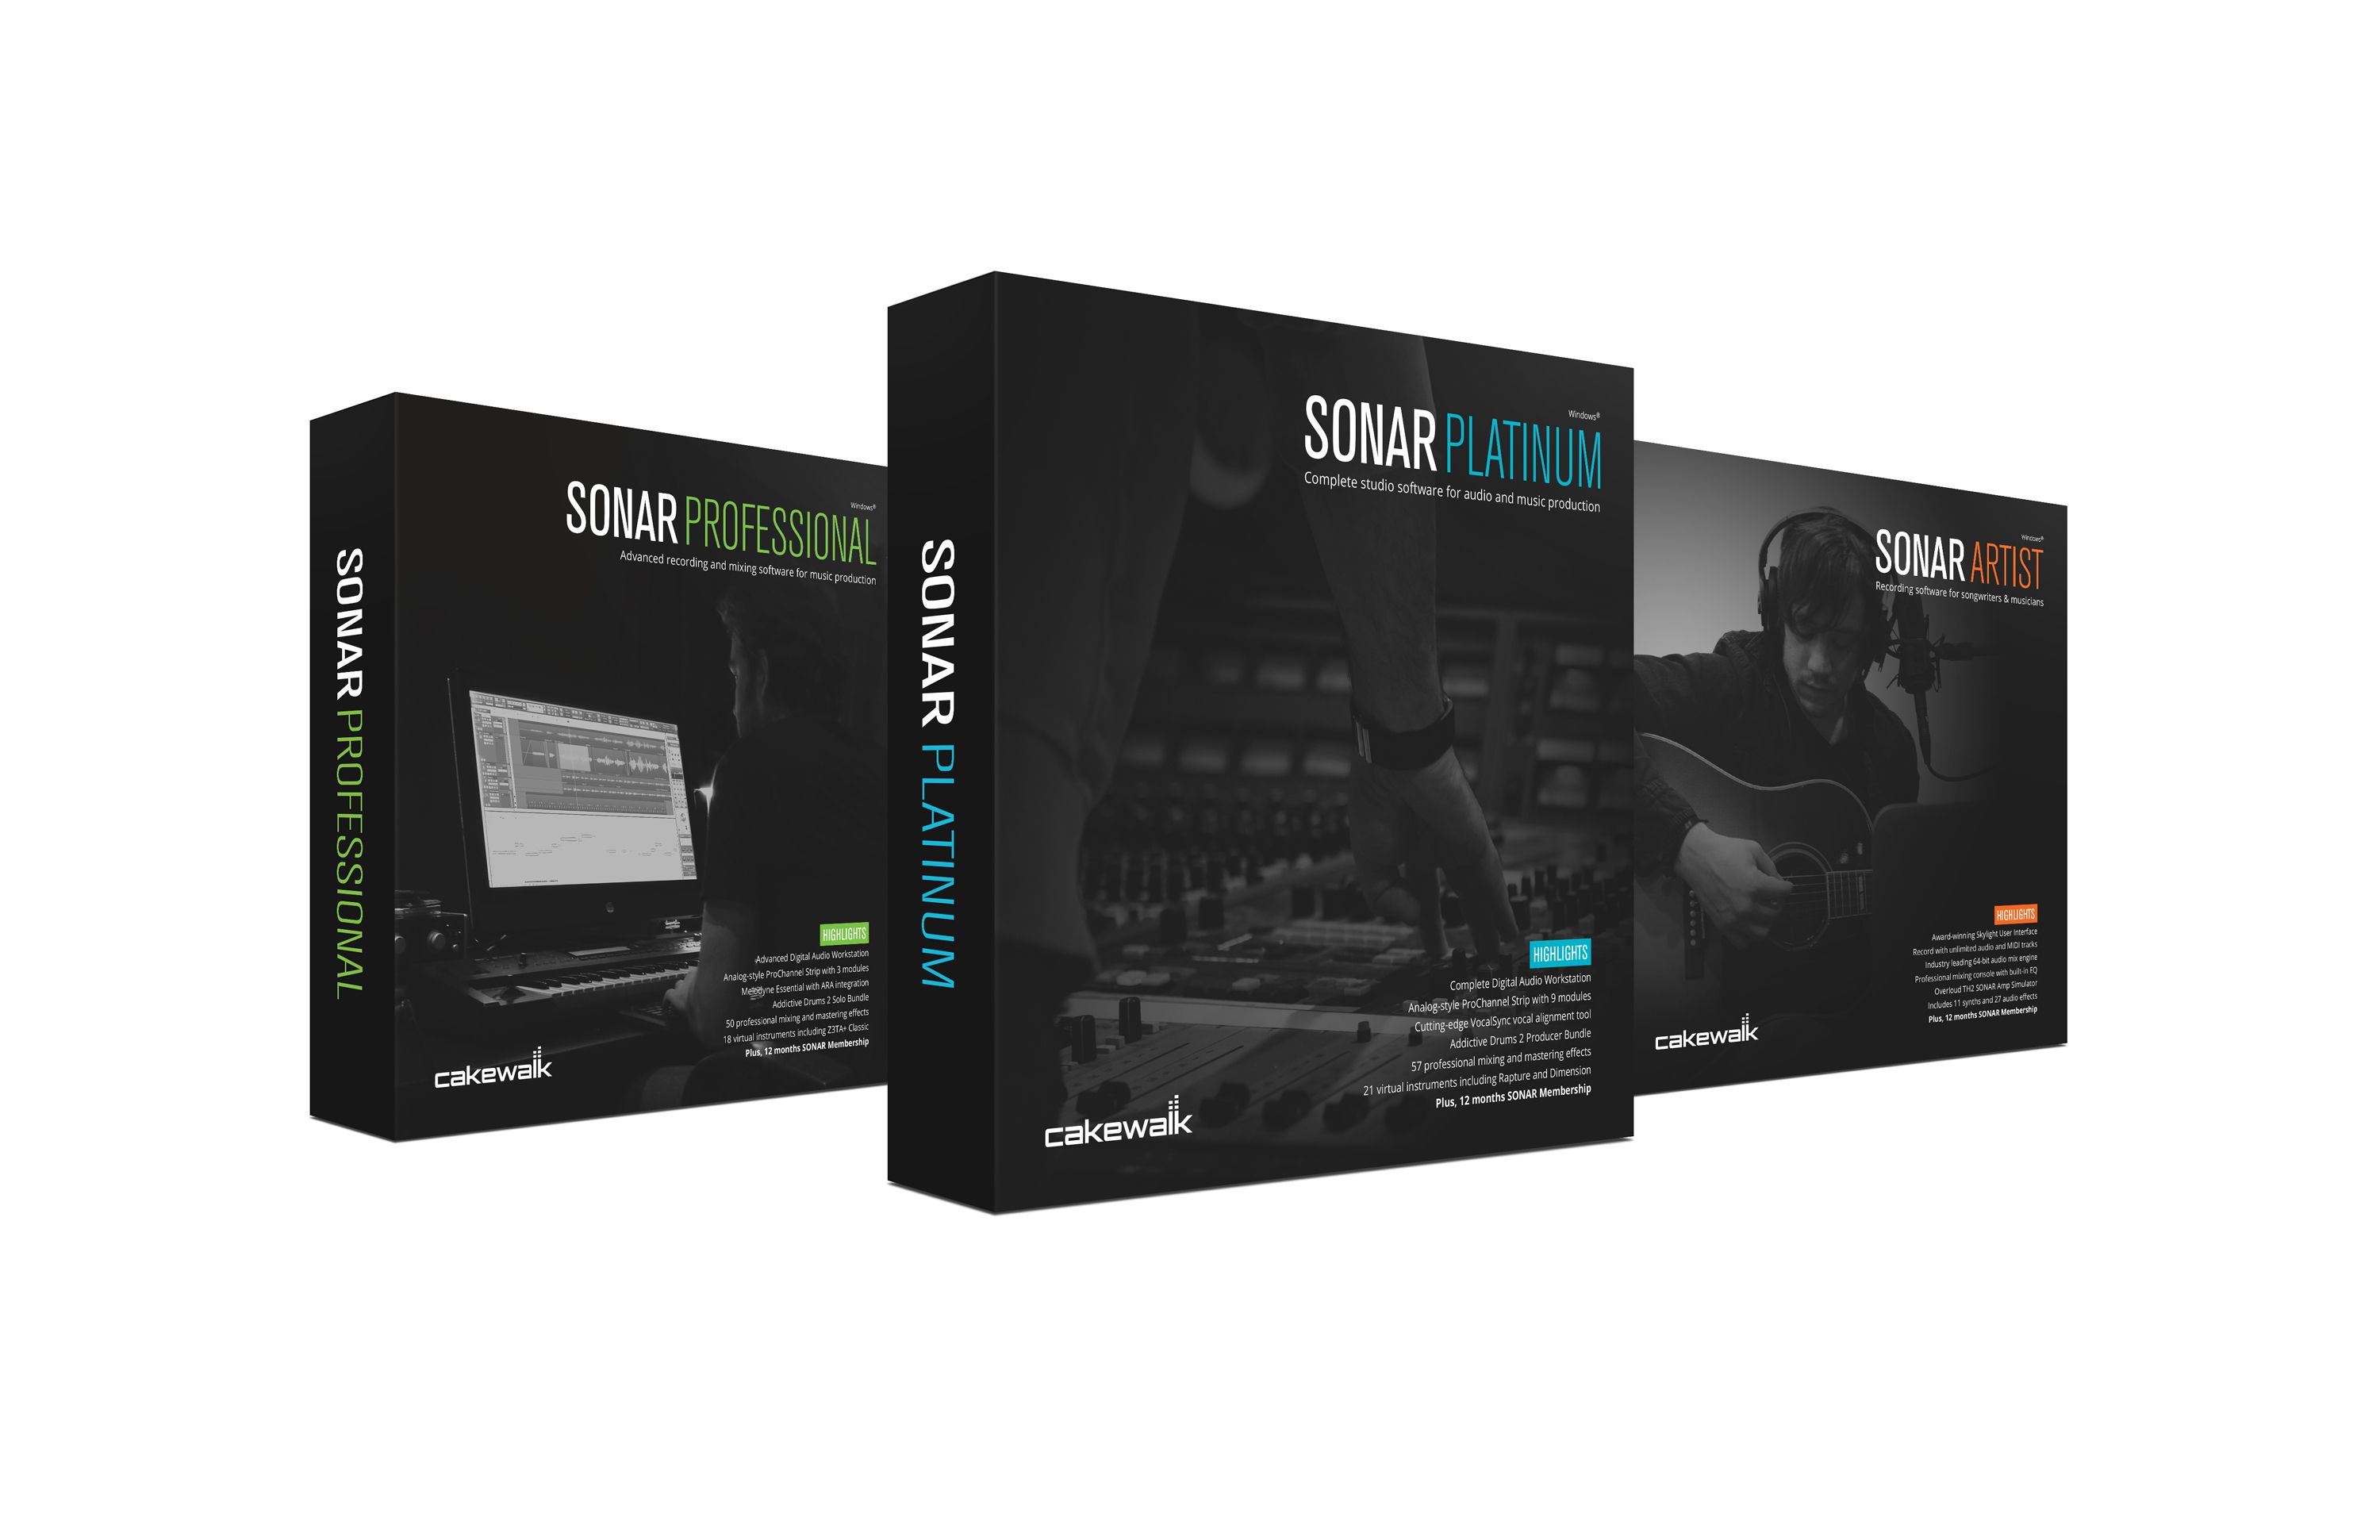 Cakewalk Sonar now comes in three flavors which can be purchased up front, or as part of a monthly subscription model.